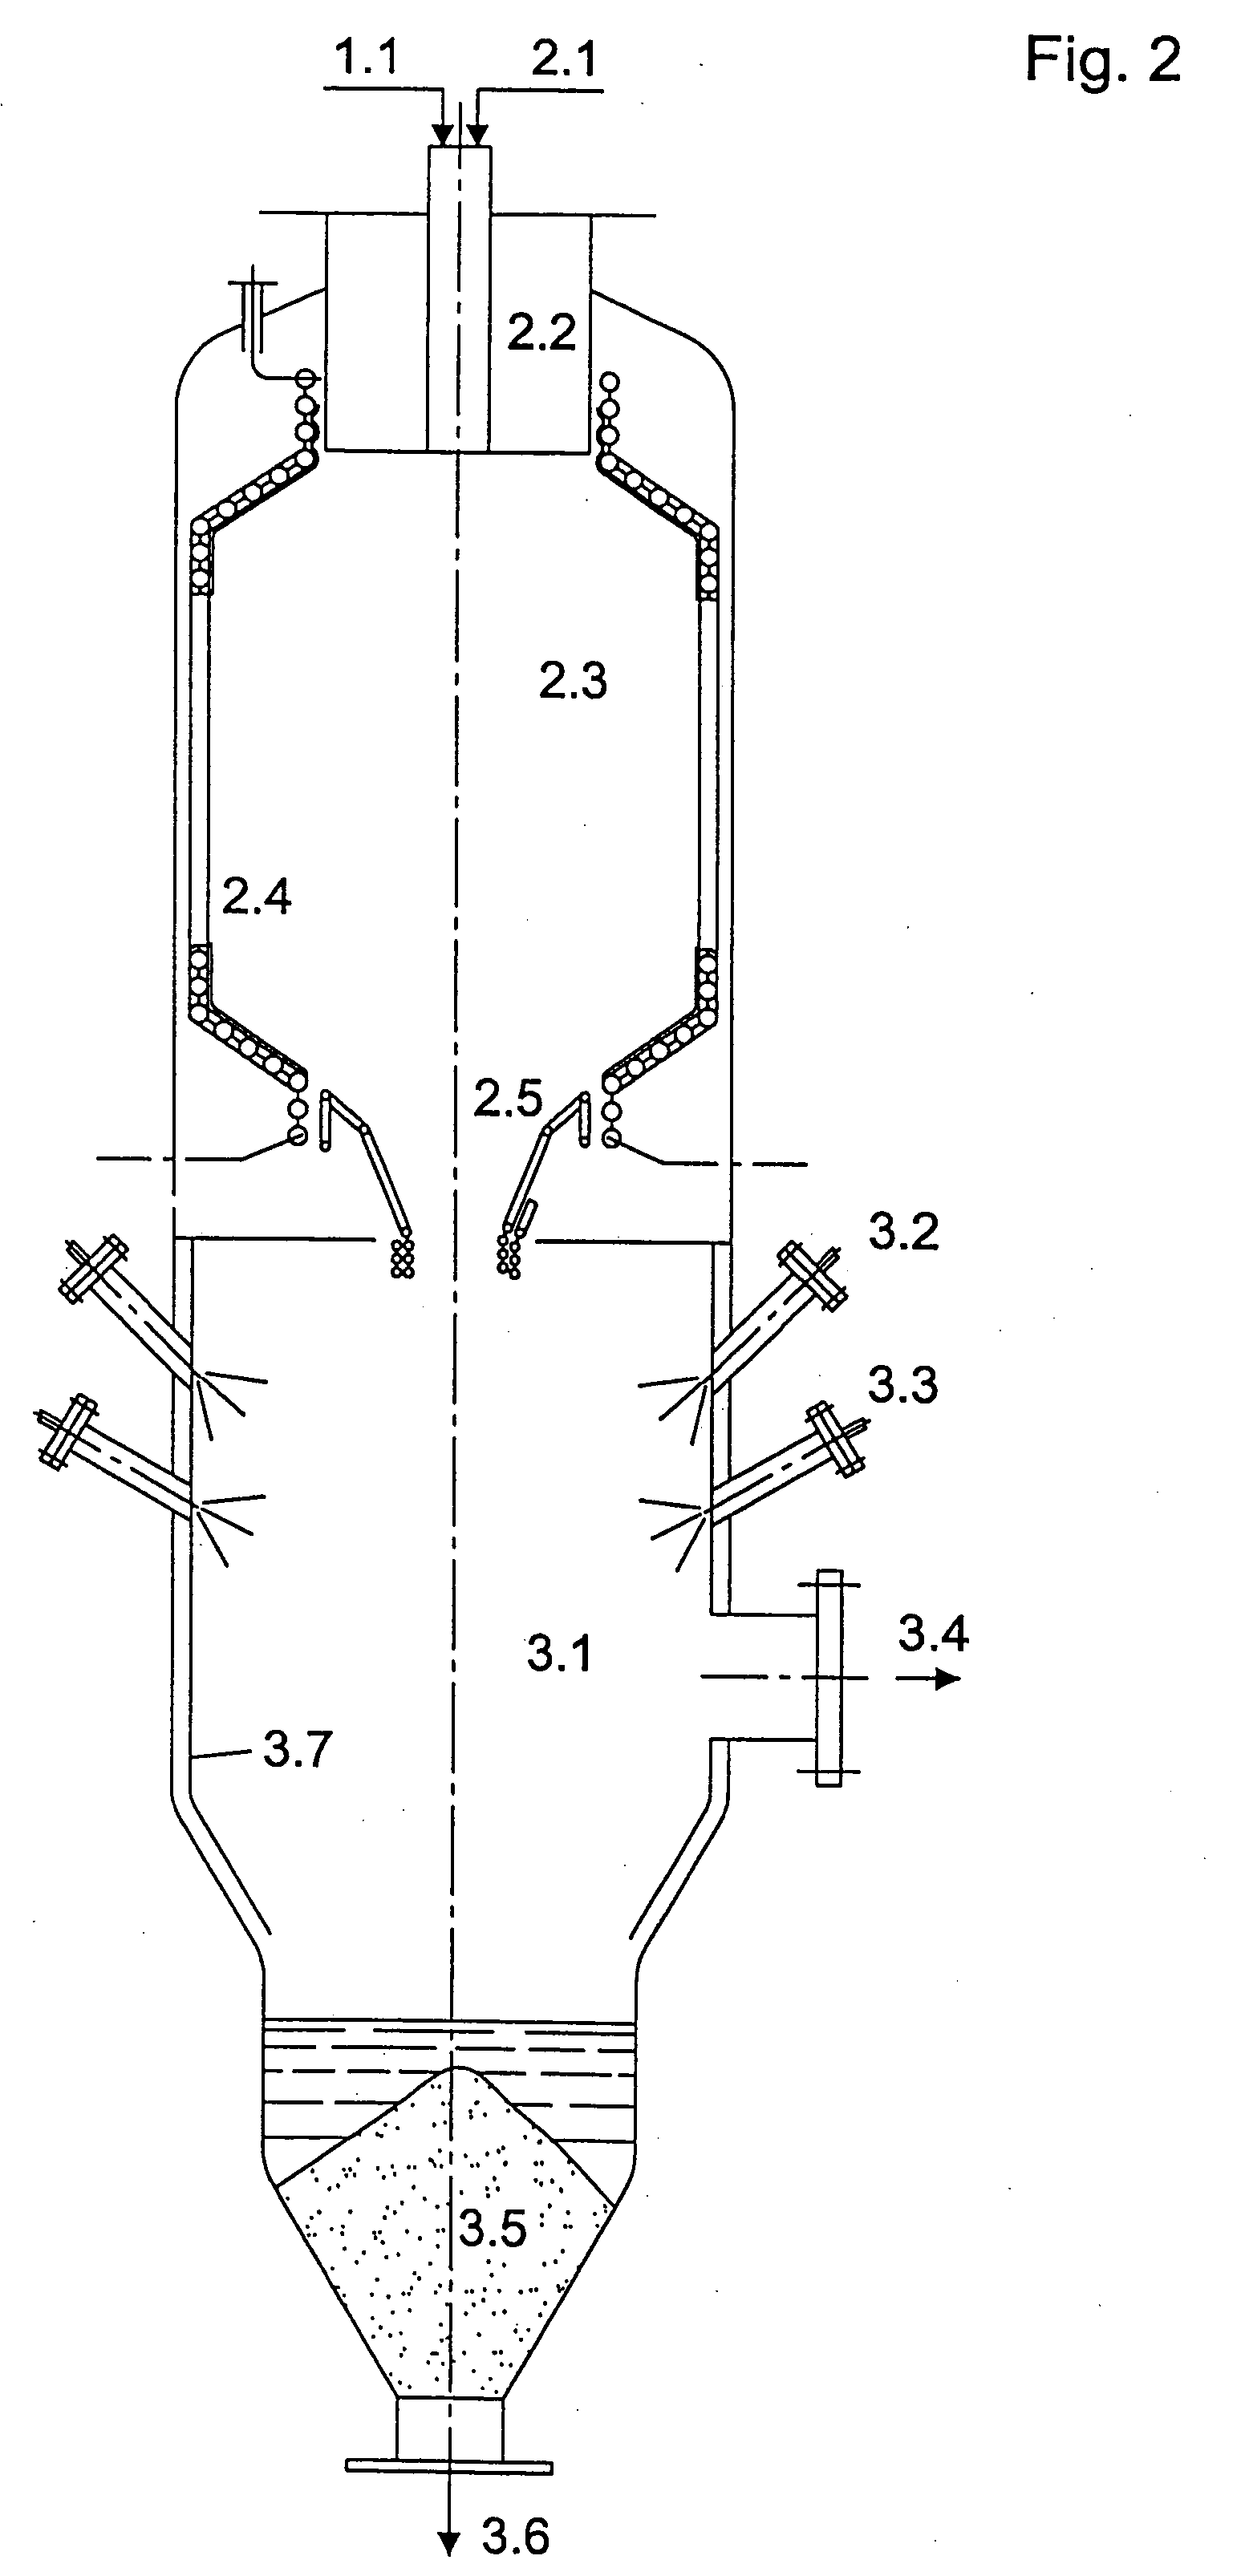 Method and device for producing synthesis gases by partial oxidation of slurries prepared from fuels containing ash and full quenching of the crude gas